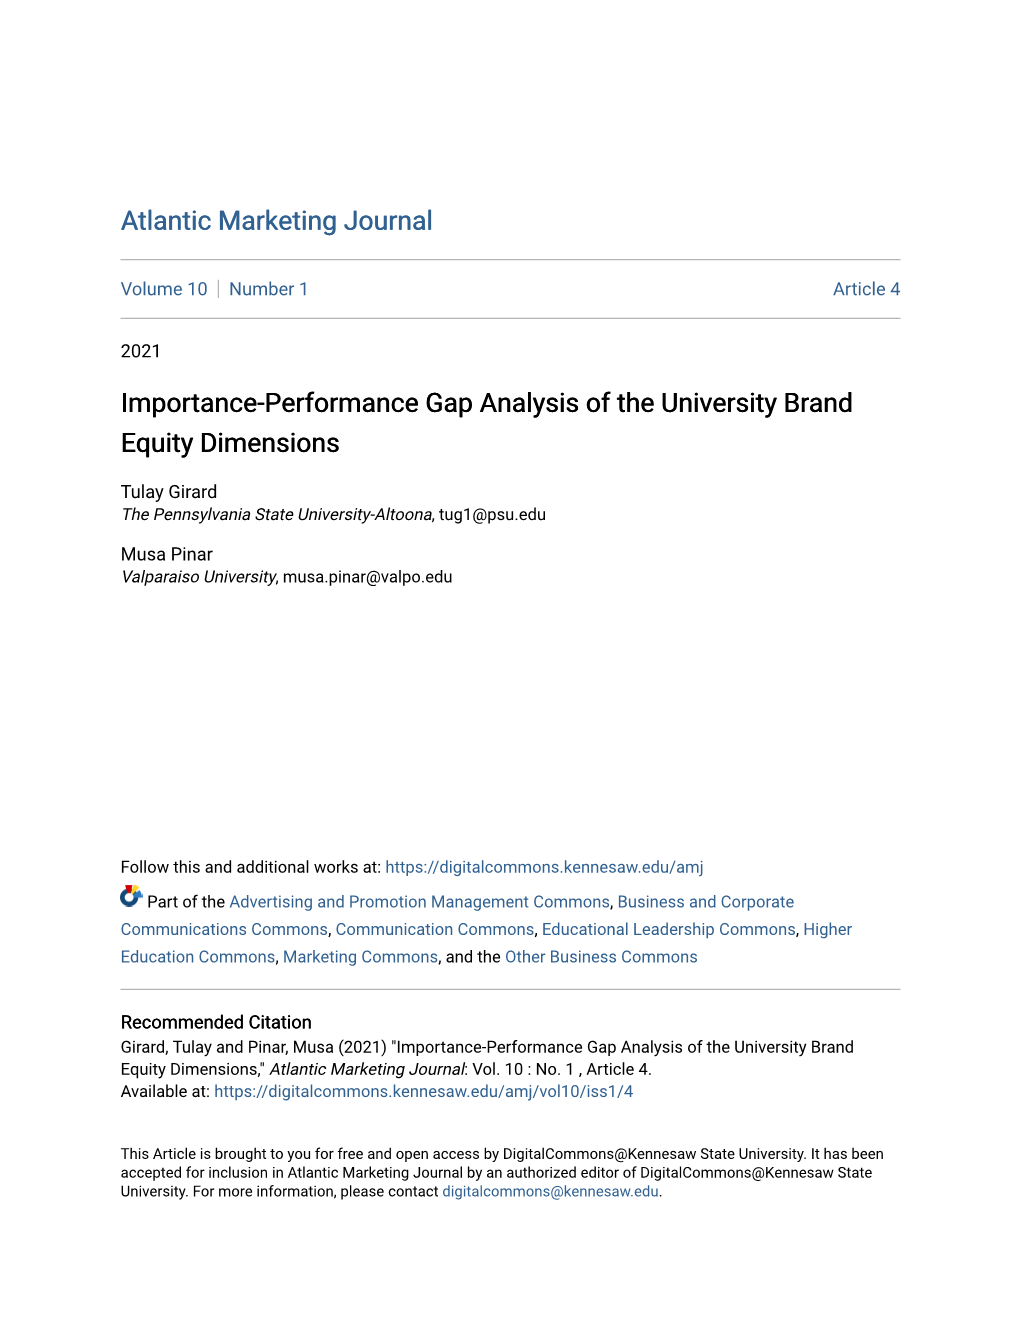 Importance-Performance Gap Analysis of the University Brand Equity Dimensions